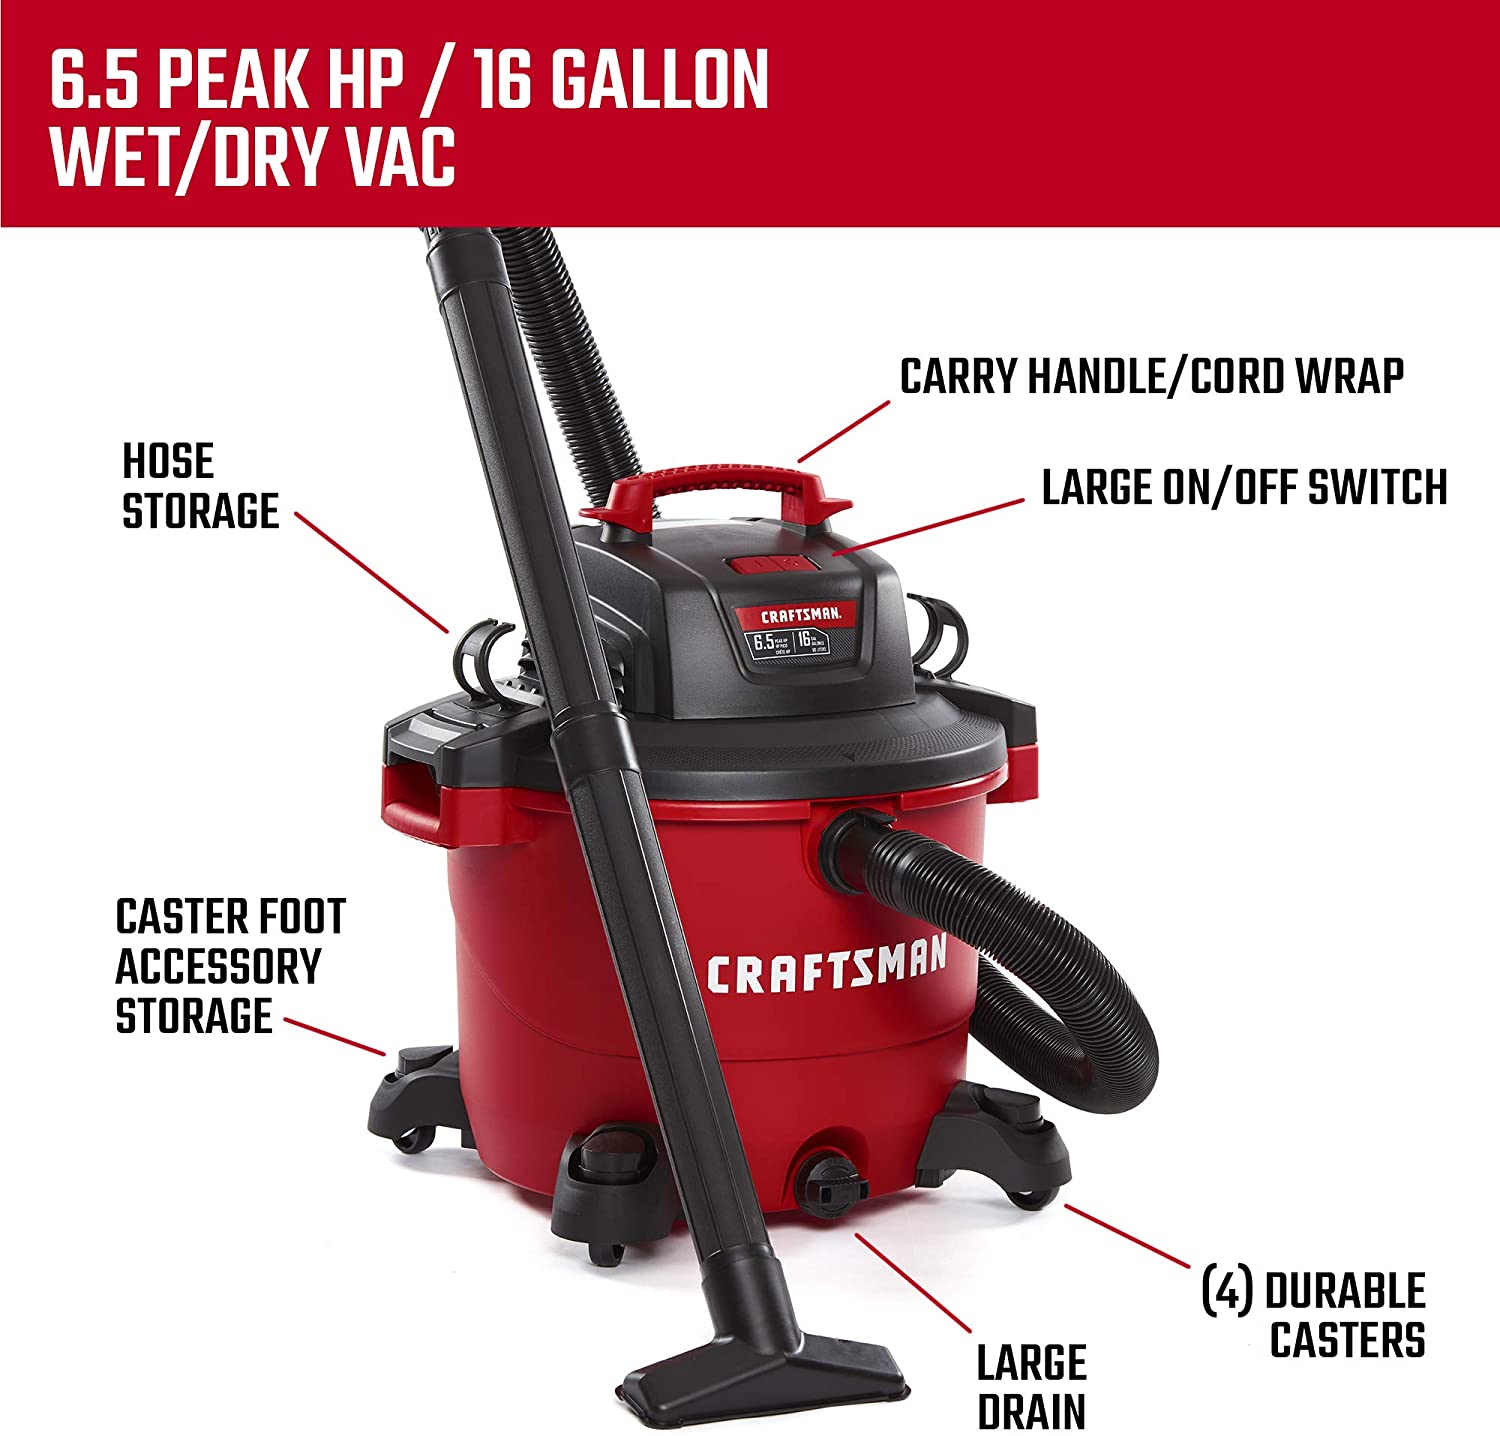 Craftsman CMXEVBE17595 16 Gallon 6.5 Peak HP Wet/Dry Vac, Heavy-Duty Shop Vacuum with Attachments - image 2 of 4